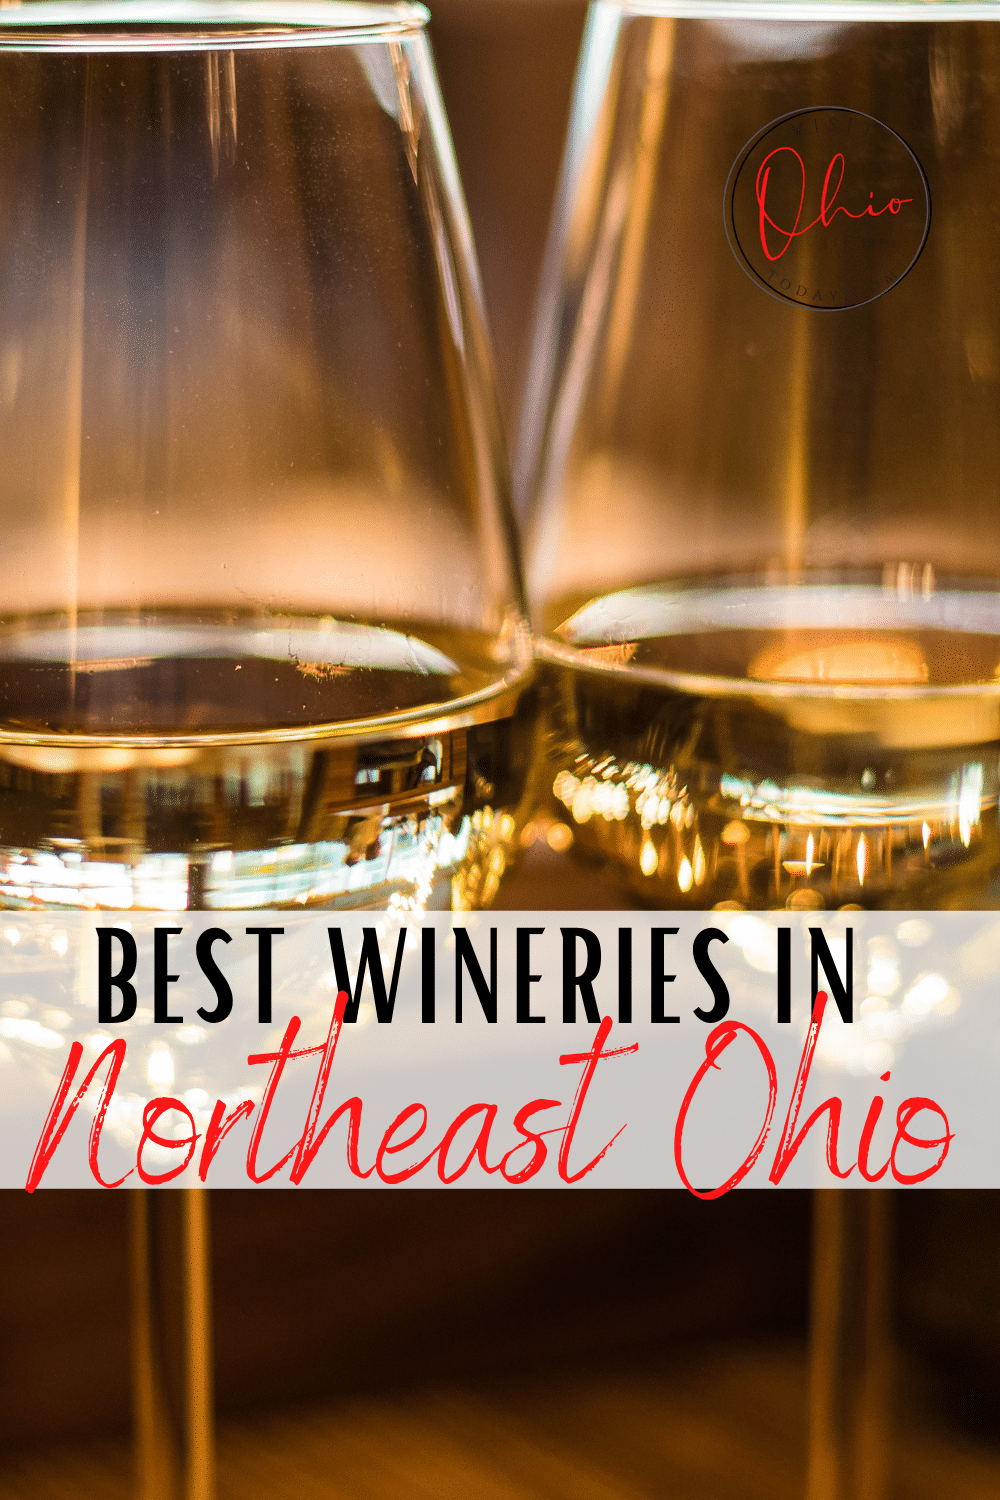 Wineries in Northeast Ohio are considered hidden gems. Wineries in Northeast Ohio produce ice wine, reds, whites and sweet fruit wines. #ohio #ohiowines #ohiowinery #northweastohio #icewine #redwine #whitewine